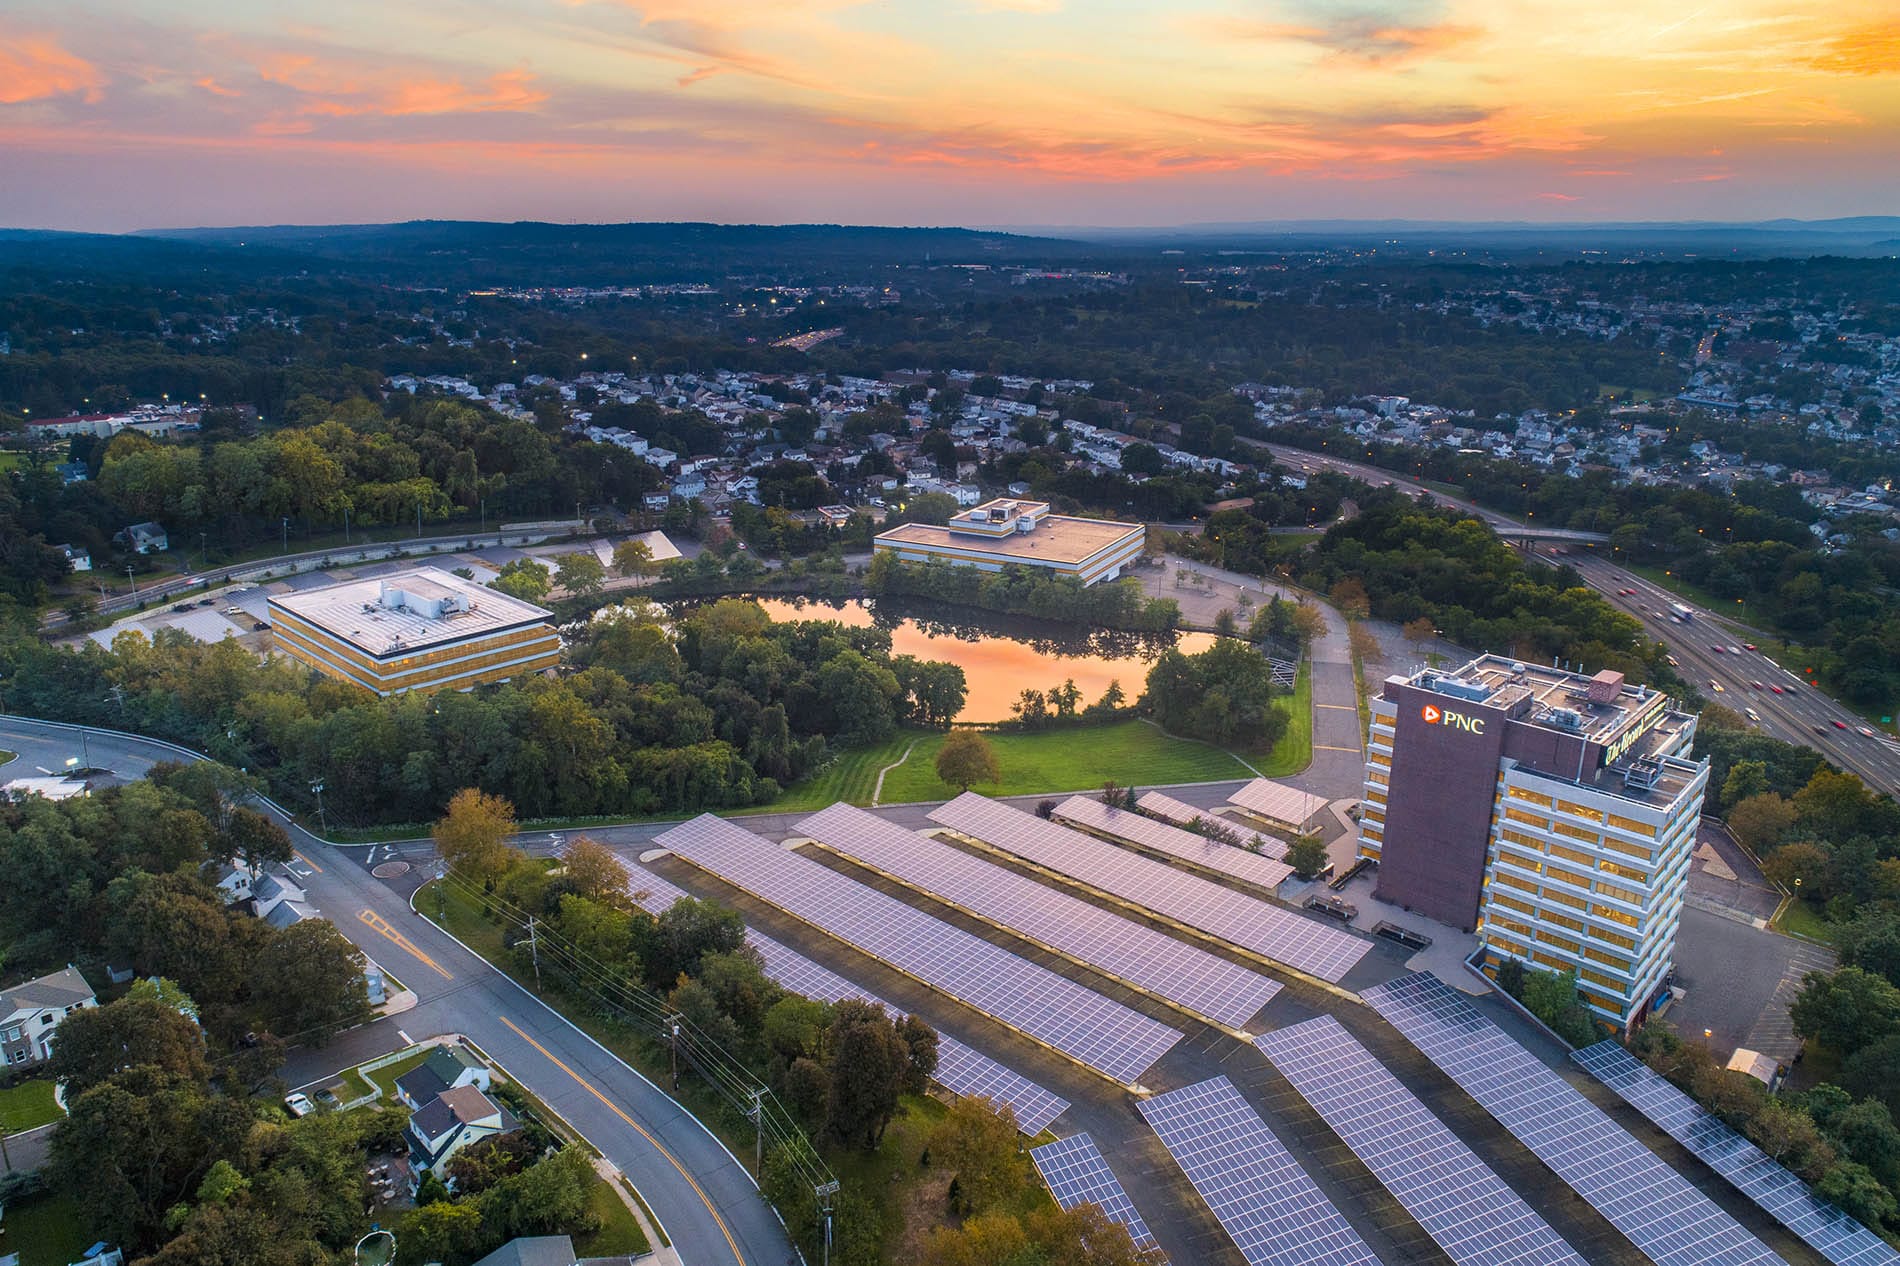 Drone Photograph taken of Commercial Buildings with Solar Panel Parking Lot in New Jersey